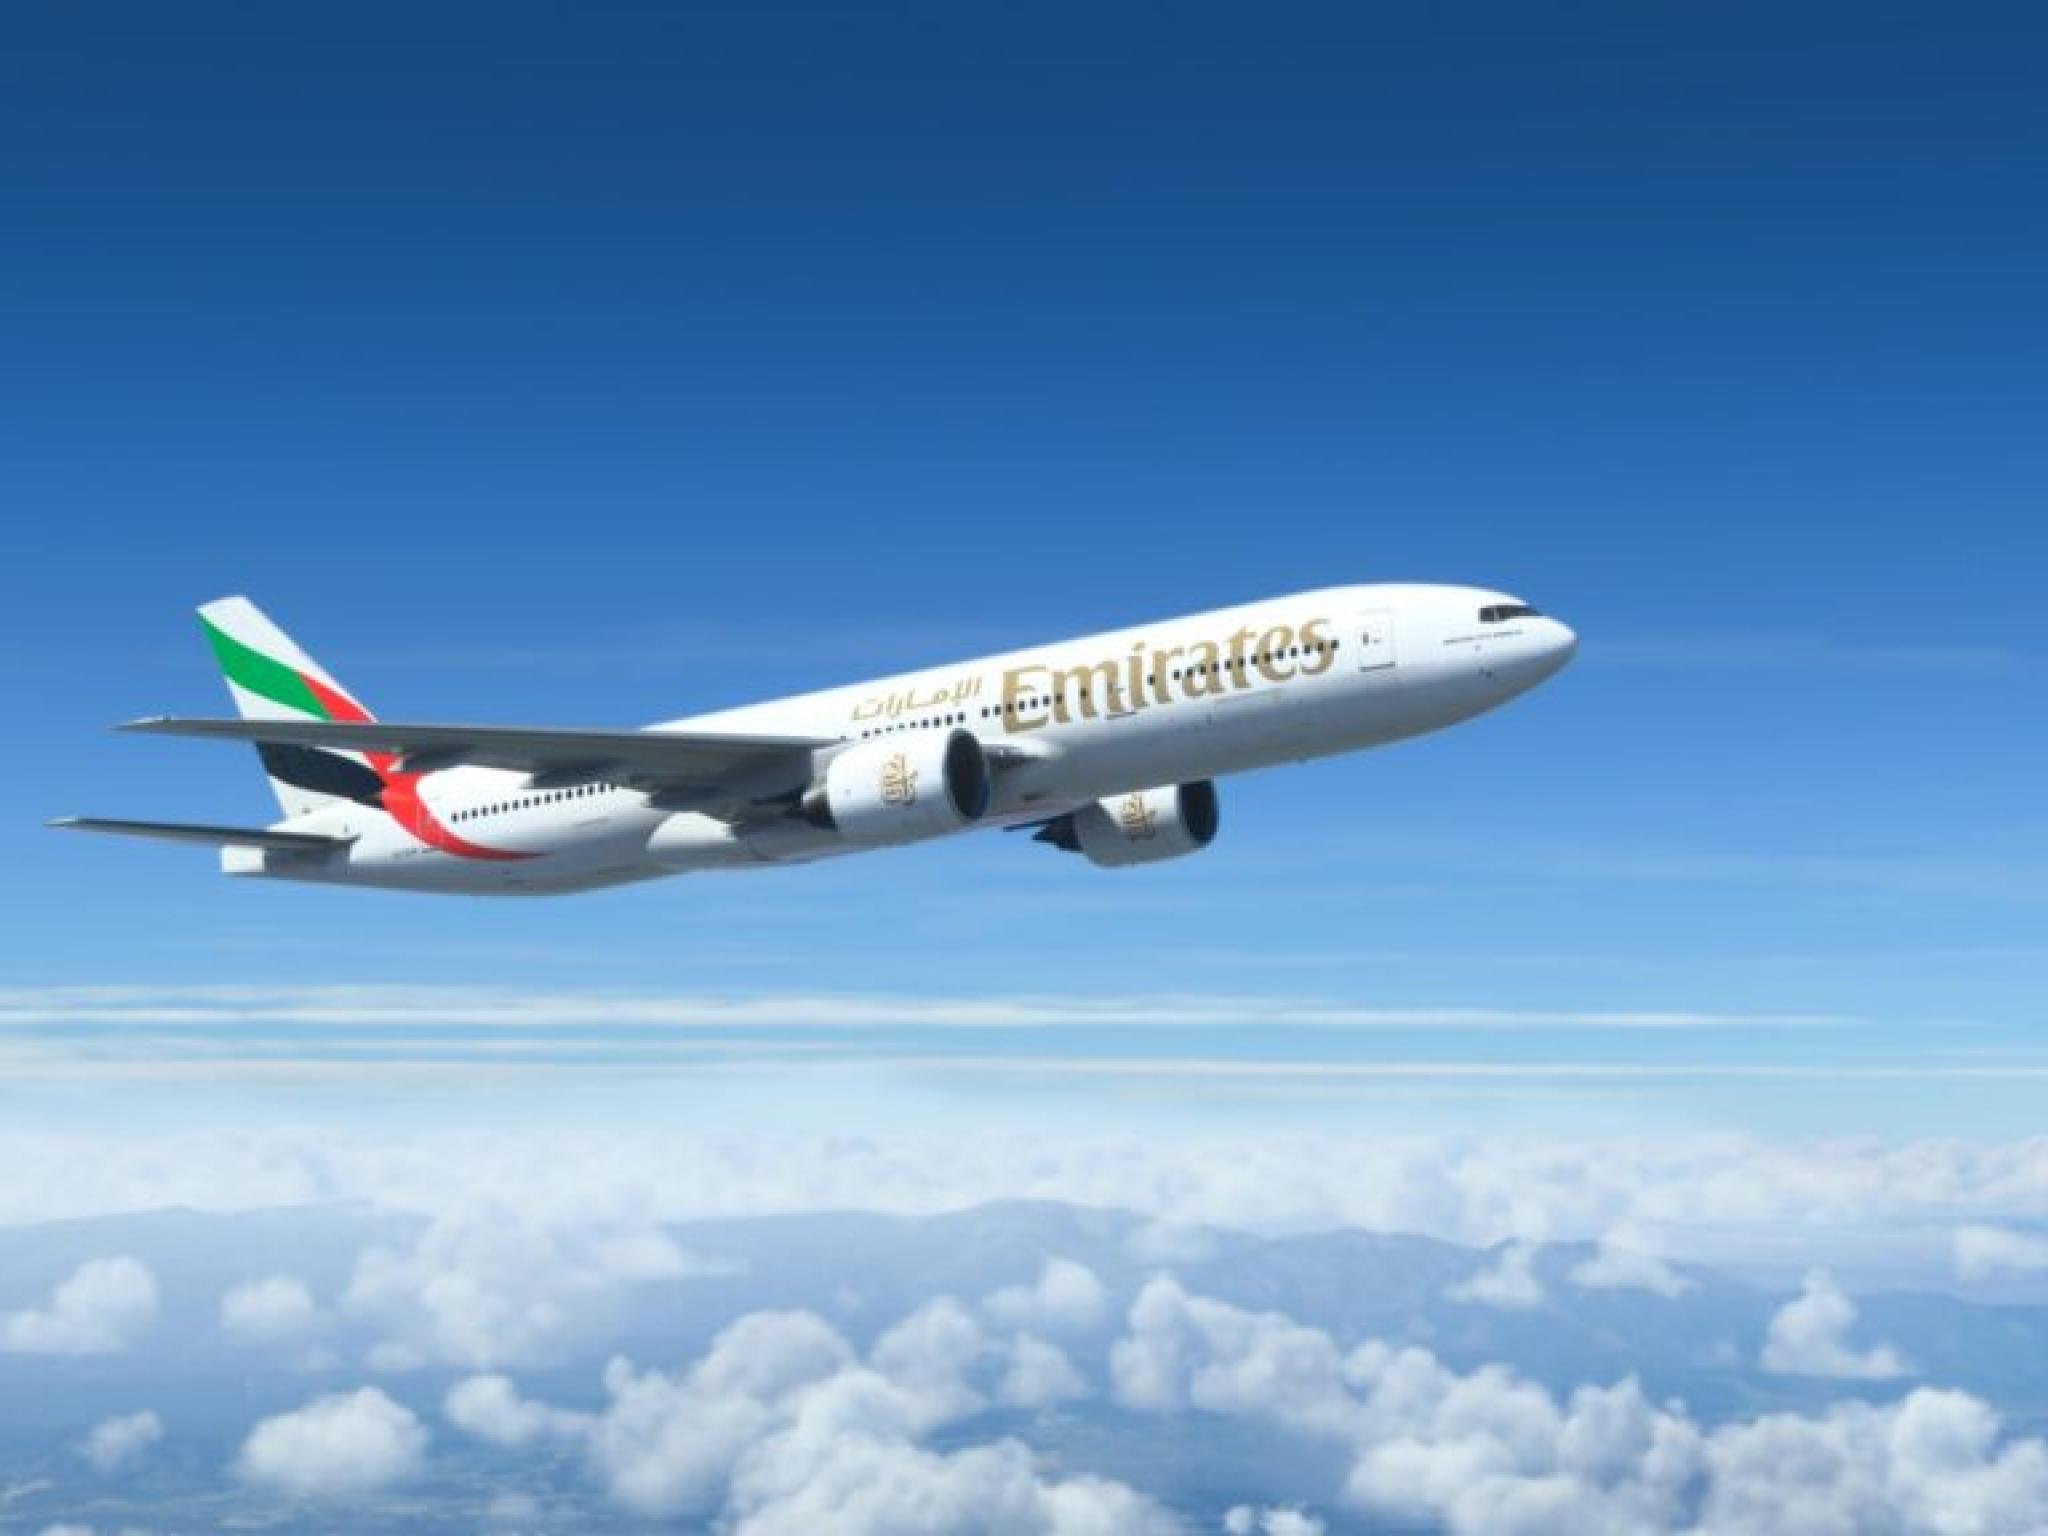  us-transport-department-slaps-15m-fine-on-emirates-for-operating-flights-in-restricted-airspace-with-jetblue-code 